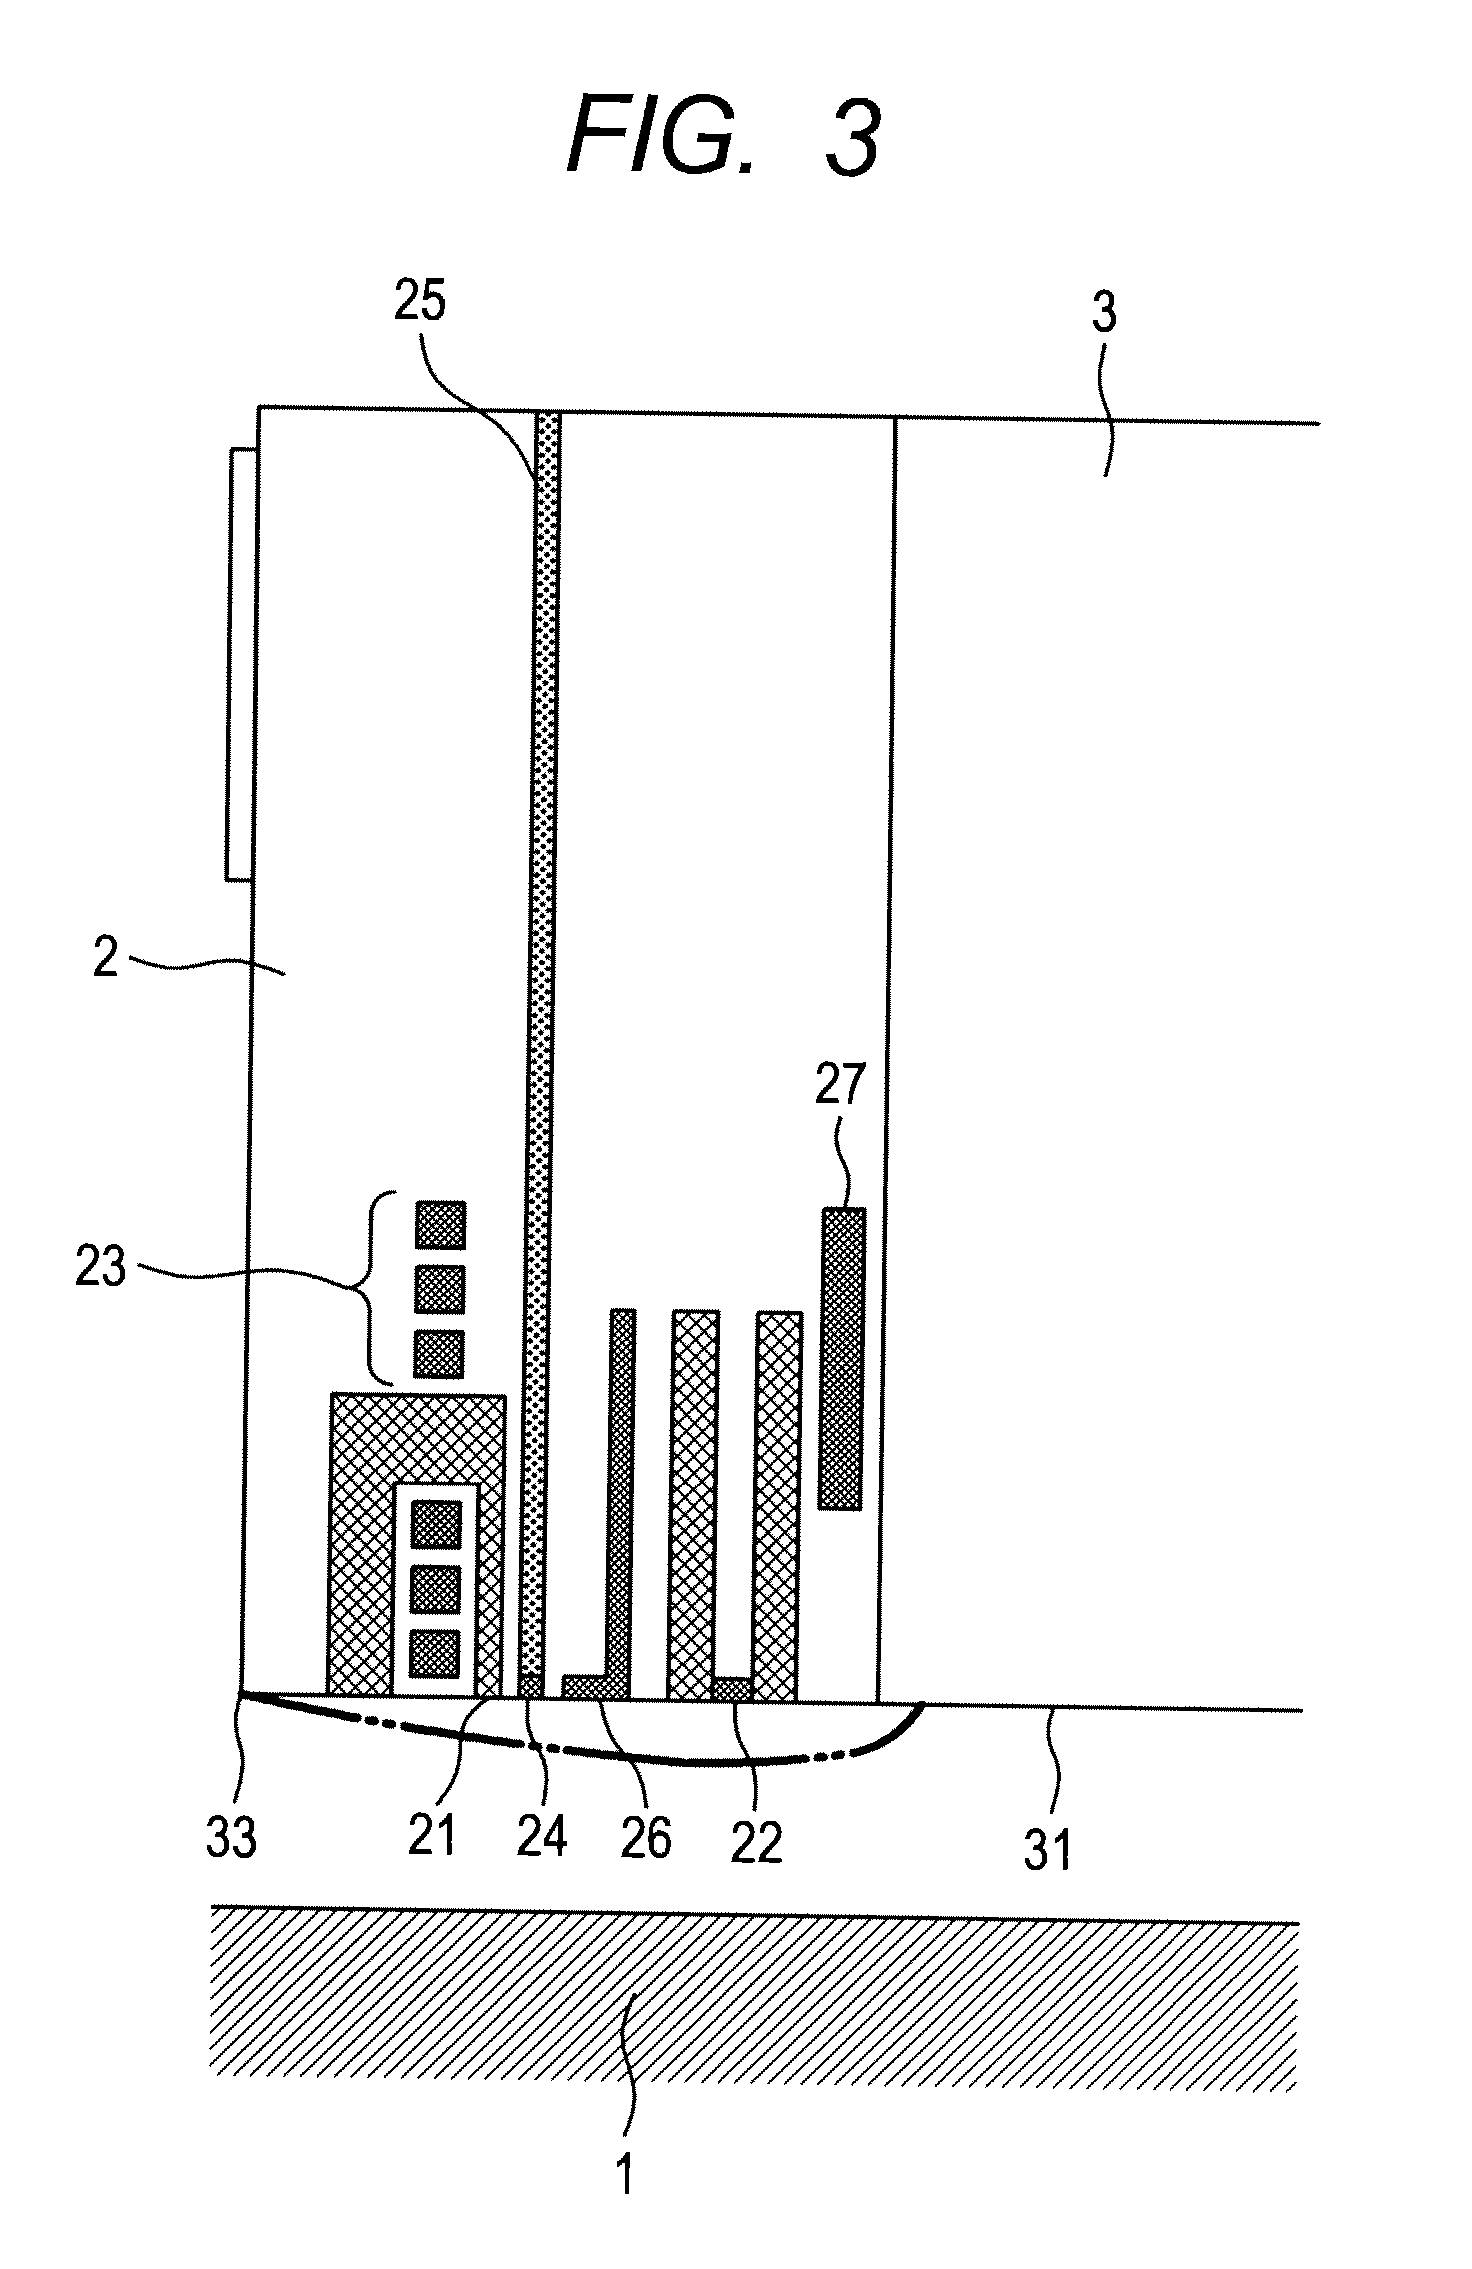 Thermally assisted magnetic recording device